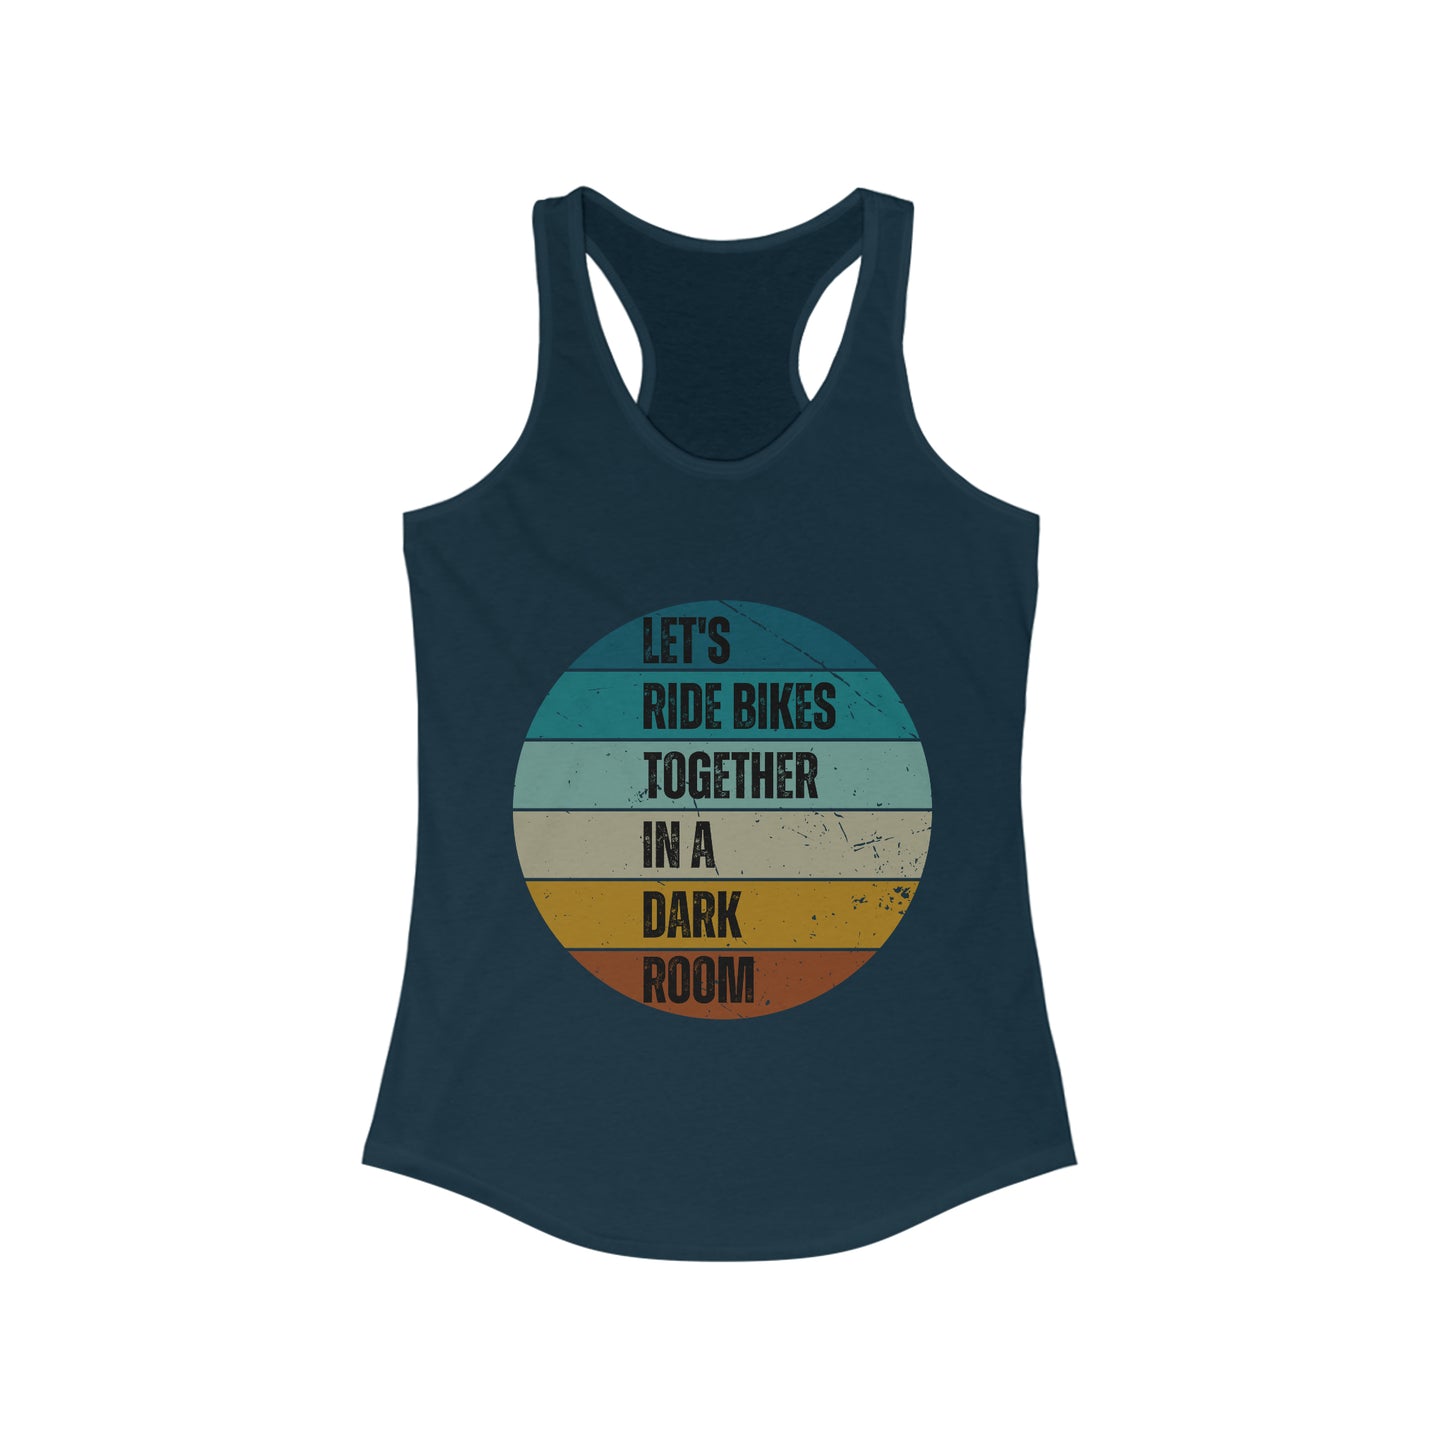 Let's Ride Bikes Together in a Dark Room Spin Class Tank Top